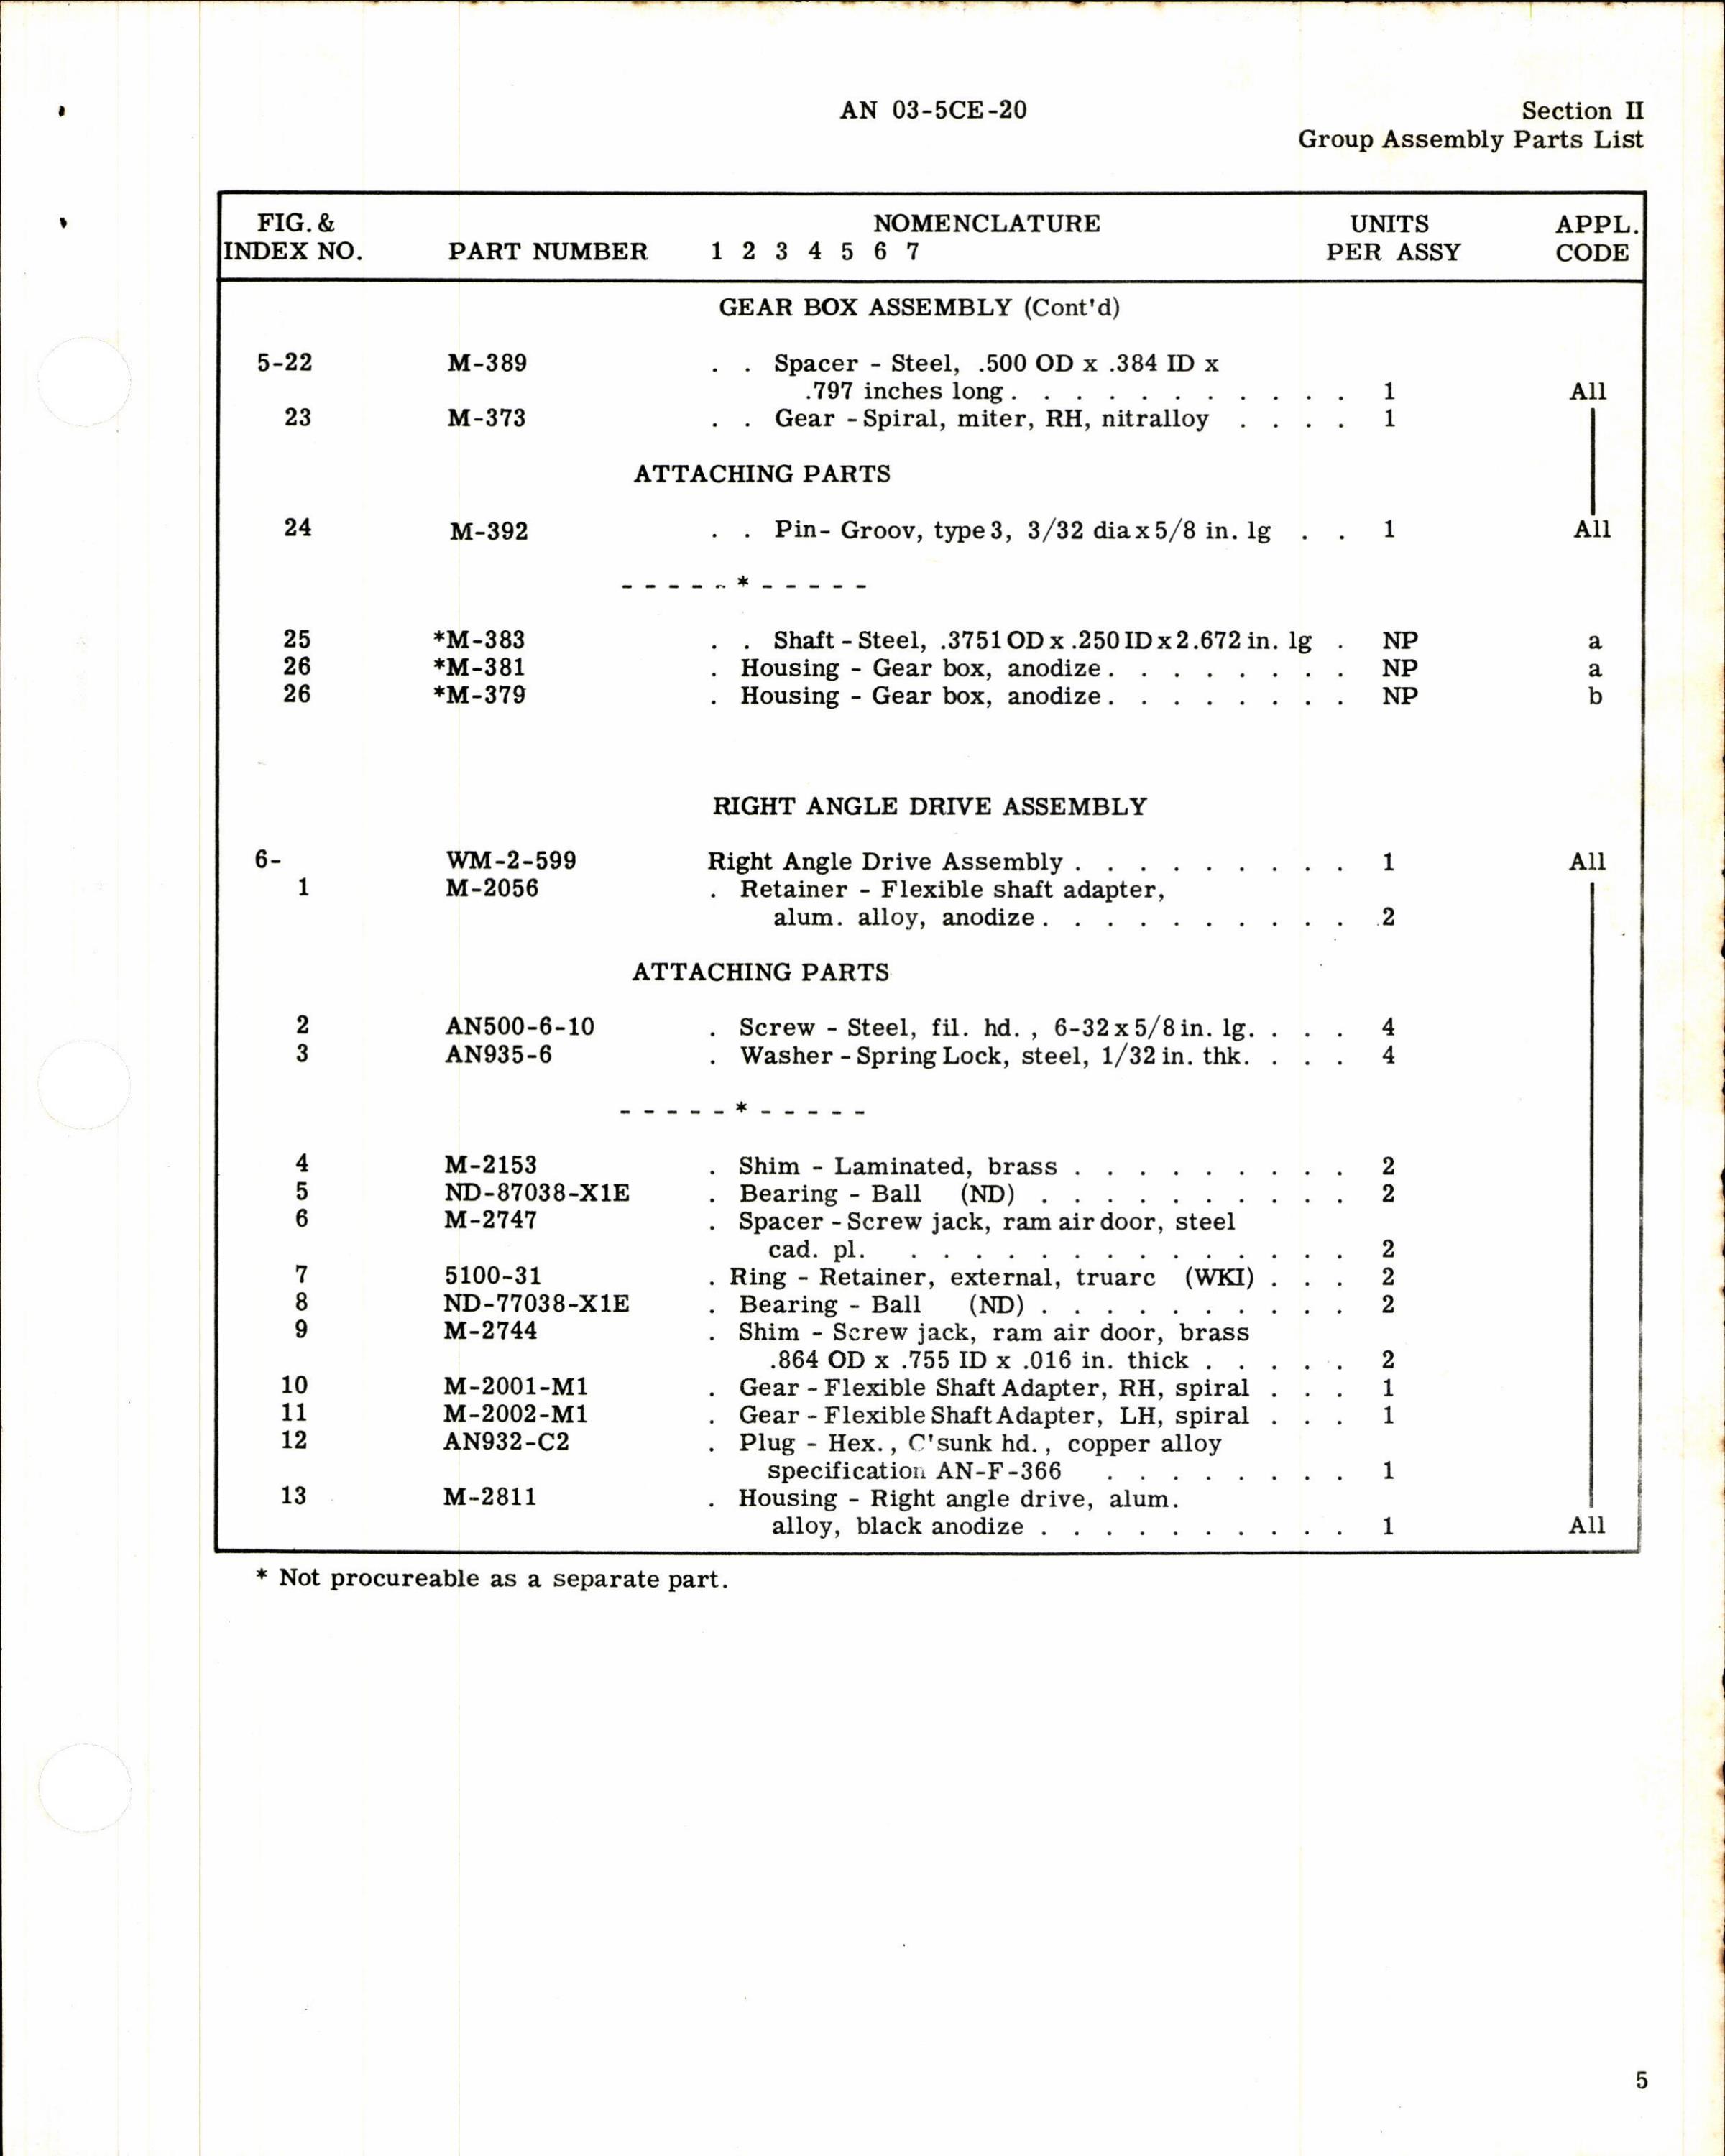 Sample page 9 from AirCorps Library document: Parts Catalog for Air Associates Gear Box and Drive Assemblies